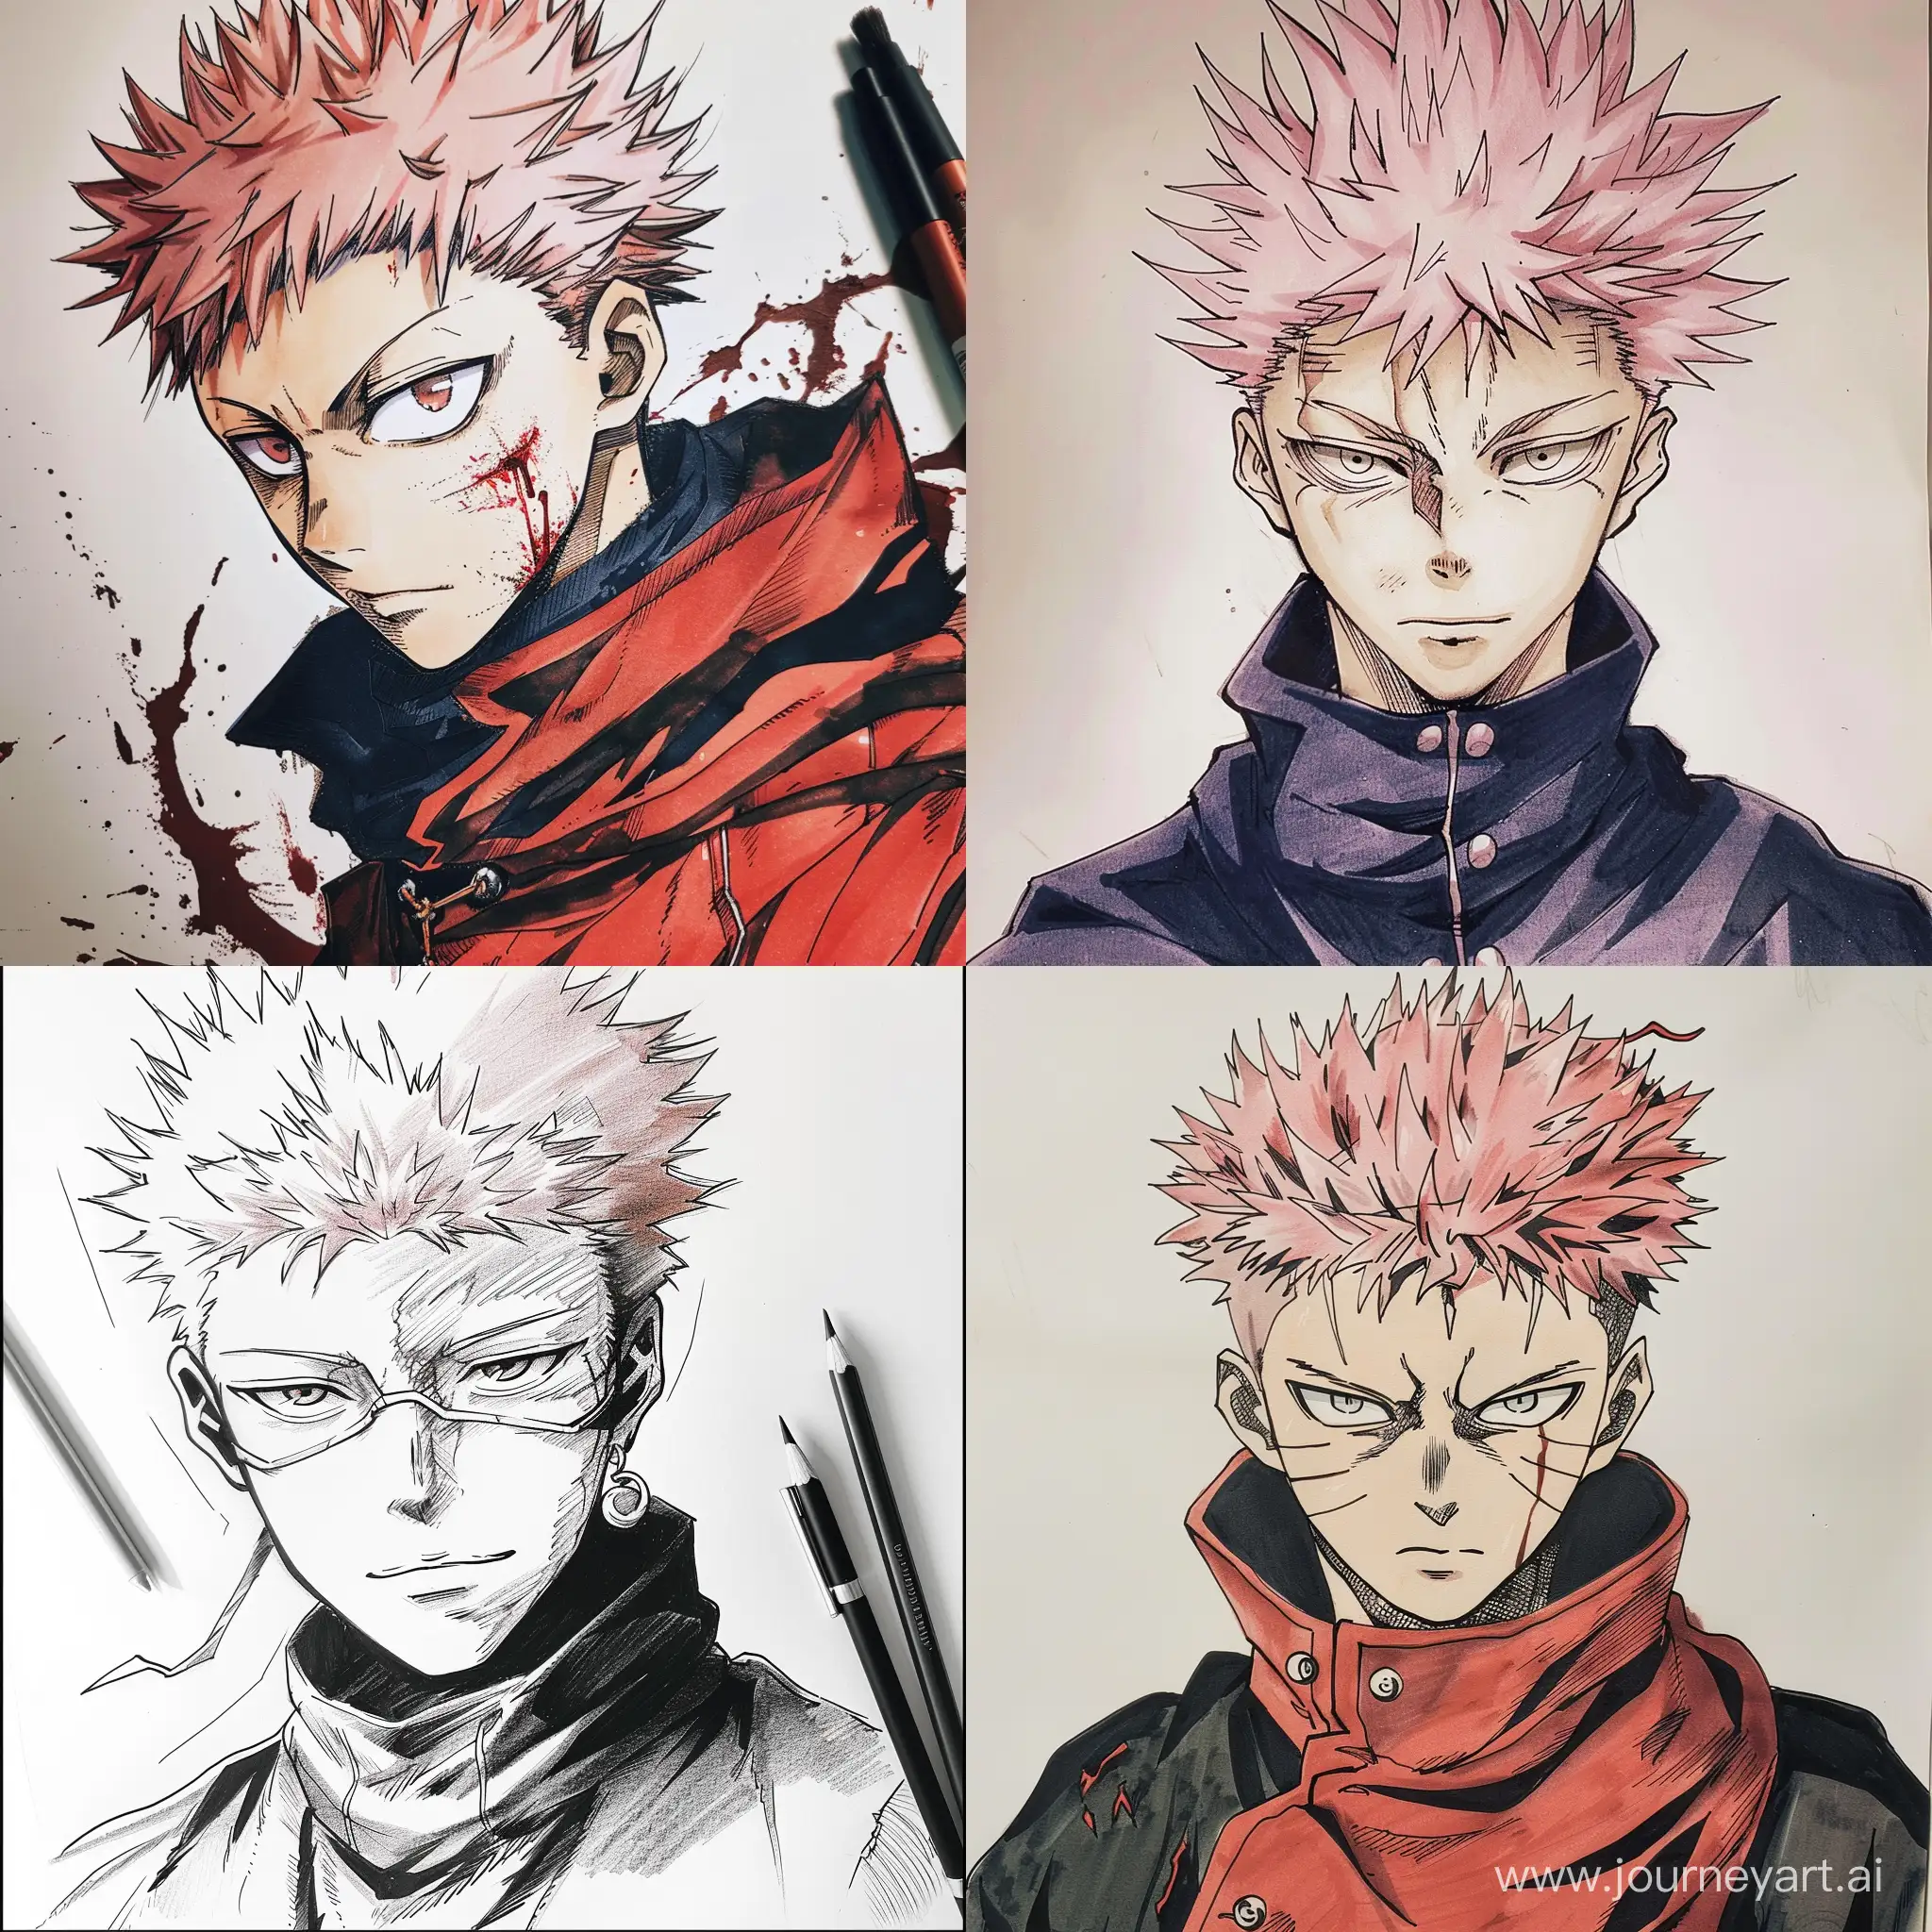 Draw a Choso from the anime Jujutsu Kaisen